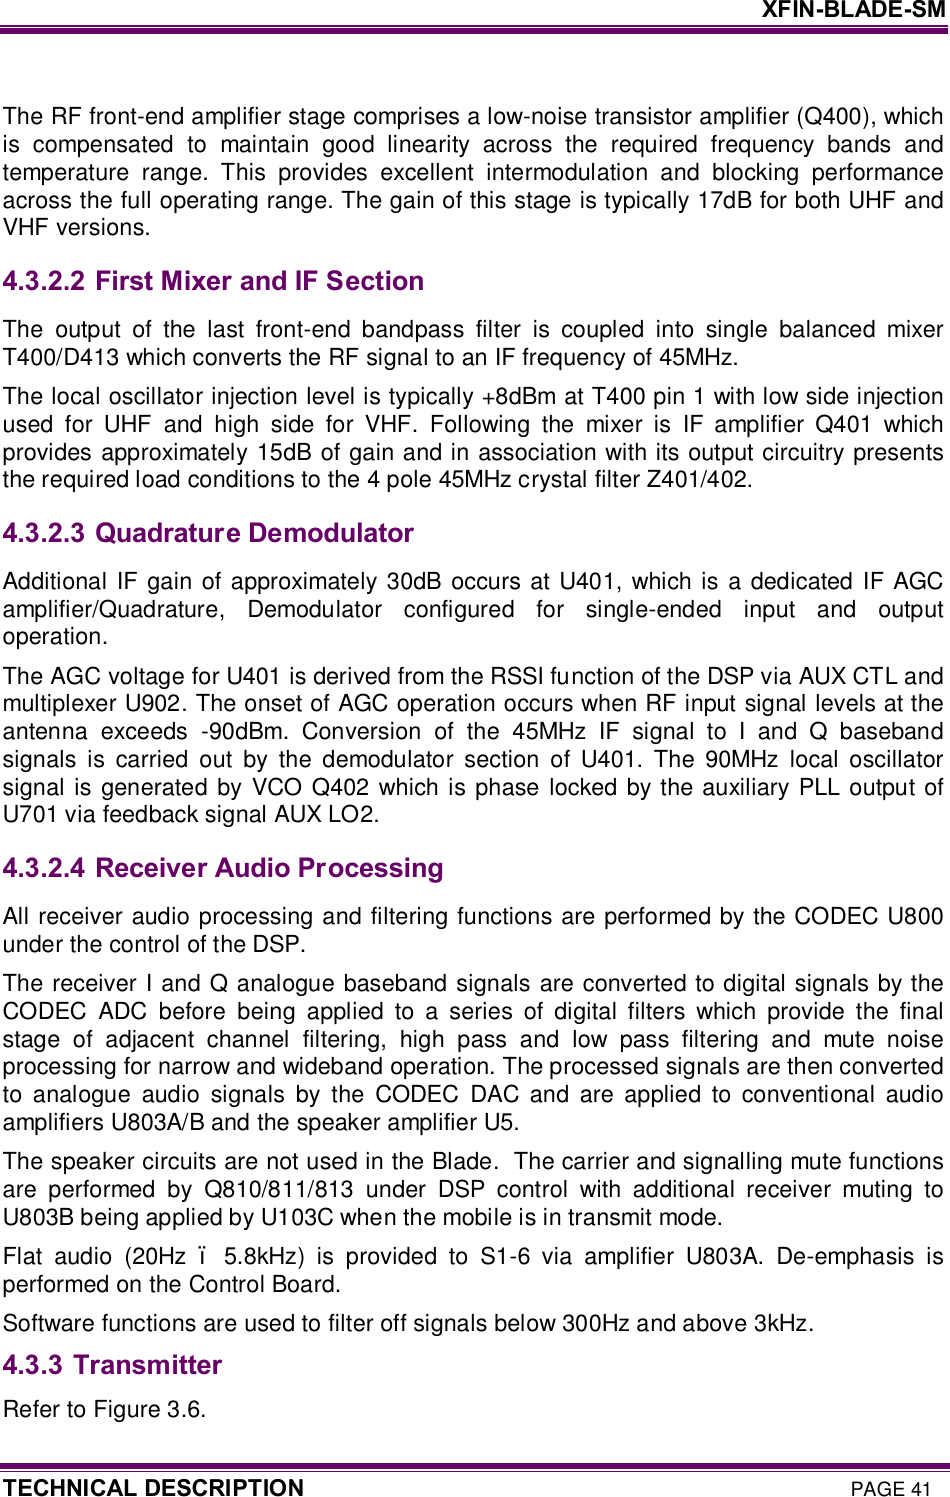     XFIN-BLADE-SM TECHNICAL DESCRIPTION PAGE 41  The RF front-end amplifier stage comprises a low-noise transistor amplifier (Q400), which is  compensated  to  maintain  good  linearity  across  the  required  frequency  bands  and temperature  range.  This  provides  excellent  intermodulation  and  blocking  performance across the full operating range. The gain of this stage is typically 17dB for both UHF and VHF versions. 4.3.2.2  First Mixer and IF Section The  output  of  the  last  front-end  bandpass  filter  is  coupled  into  single  balanced  mixer T400/D413 which converts the RF signal to an IF frequency of 45MHz.  The local oscillator injection level is typically +8dBm at T400 pin 1 with low side injection used  for  UHF  and  high  side  for  VHF.  Following  the  mixer  is  IF  amplifier  Q401  which provides approximately 15dB of gain and in association with its output circuitry presents the required load conditions to the 4 pole 45MHz crystal filter Z401/402.  4.3.2.3  Quadrature Demodulator Additional IF gain of approximately 30dB  occurs at  U401,  which is a  dedicated IF AGC amplifier/Quadrature,  Demodulator  configured  for  single-ended  input  and  output operation.  The AGC voltage for U401 is derived from the RSSI function of the DSP via AUX CTL and multiplexer U902. The onset of AGC operation occurs when RF input signal levels at the antenna  exceeds  -90dBm.  Conversion  of  the  45MHz  IF  signal  to  I  and  Q  baseband signals  is  carried  out  by  the  demodulator  section  of  U401.  The  90MHz  local oscillator signal is generated by VCO Q402  which is phase locked by the auxiliary PLL output of U701 via feedback signal AUX LO2.  4.3.2.4  Receiver Audio Processing All receiver audio processing and filtering functions are performed by the CODEC U800 under the control of the DSP. The receiver I and Q analogue baseband signals are converted to digital signals by the CODEC  ADC  before  being  applied  to  a  series  of  digital  filters  which  provide  the  final stage  of  adjacent  channel  filtering,  high  pass  and  low  pass  filtering  and  mute  noise processing for narrow and wideband operation. The processed signals are then converted to  analogue  audio  signals  by  the  CODEC  DAC  and  are  applied  to  conventional  audio amplifiers U803A/B and the speaker amplifier U5.  The speaker circuits are not used in the Blade.  The carrier and signalling mute functions are  performed  by  Q810/811/813  under  DSP  control  with  additional  receiver  muting  to U803B being applied by U103C when the mobile is in transmit mode.  Flat  audio  (20Hz  –  5.8kHz)  is  provided  to  S1-6  via  amplifier  U803A.  De-emphasis  is performed on the Control Board.  Software functions are used to filter off signals below 300Hz and above 3kHz. 4.3.3 Transmitter Refer to Figure 3.6. 